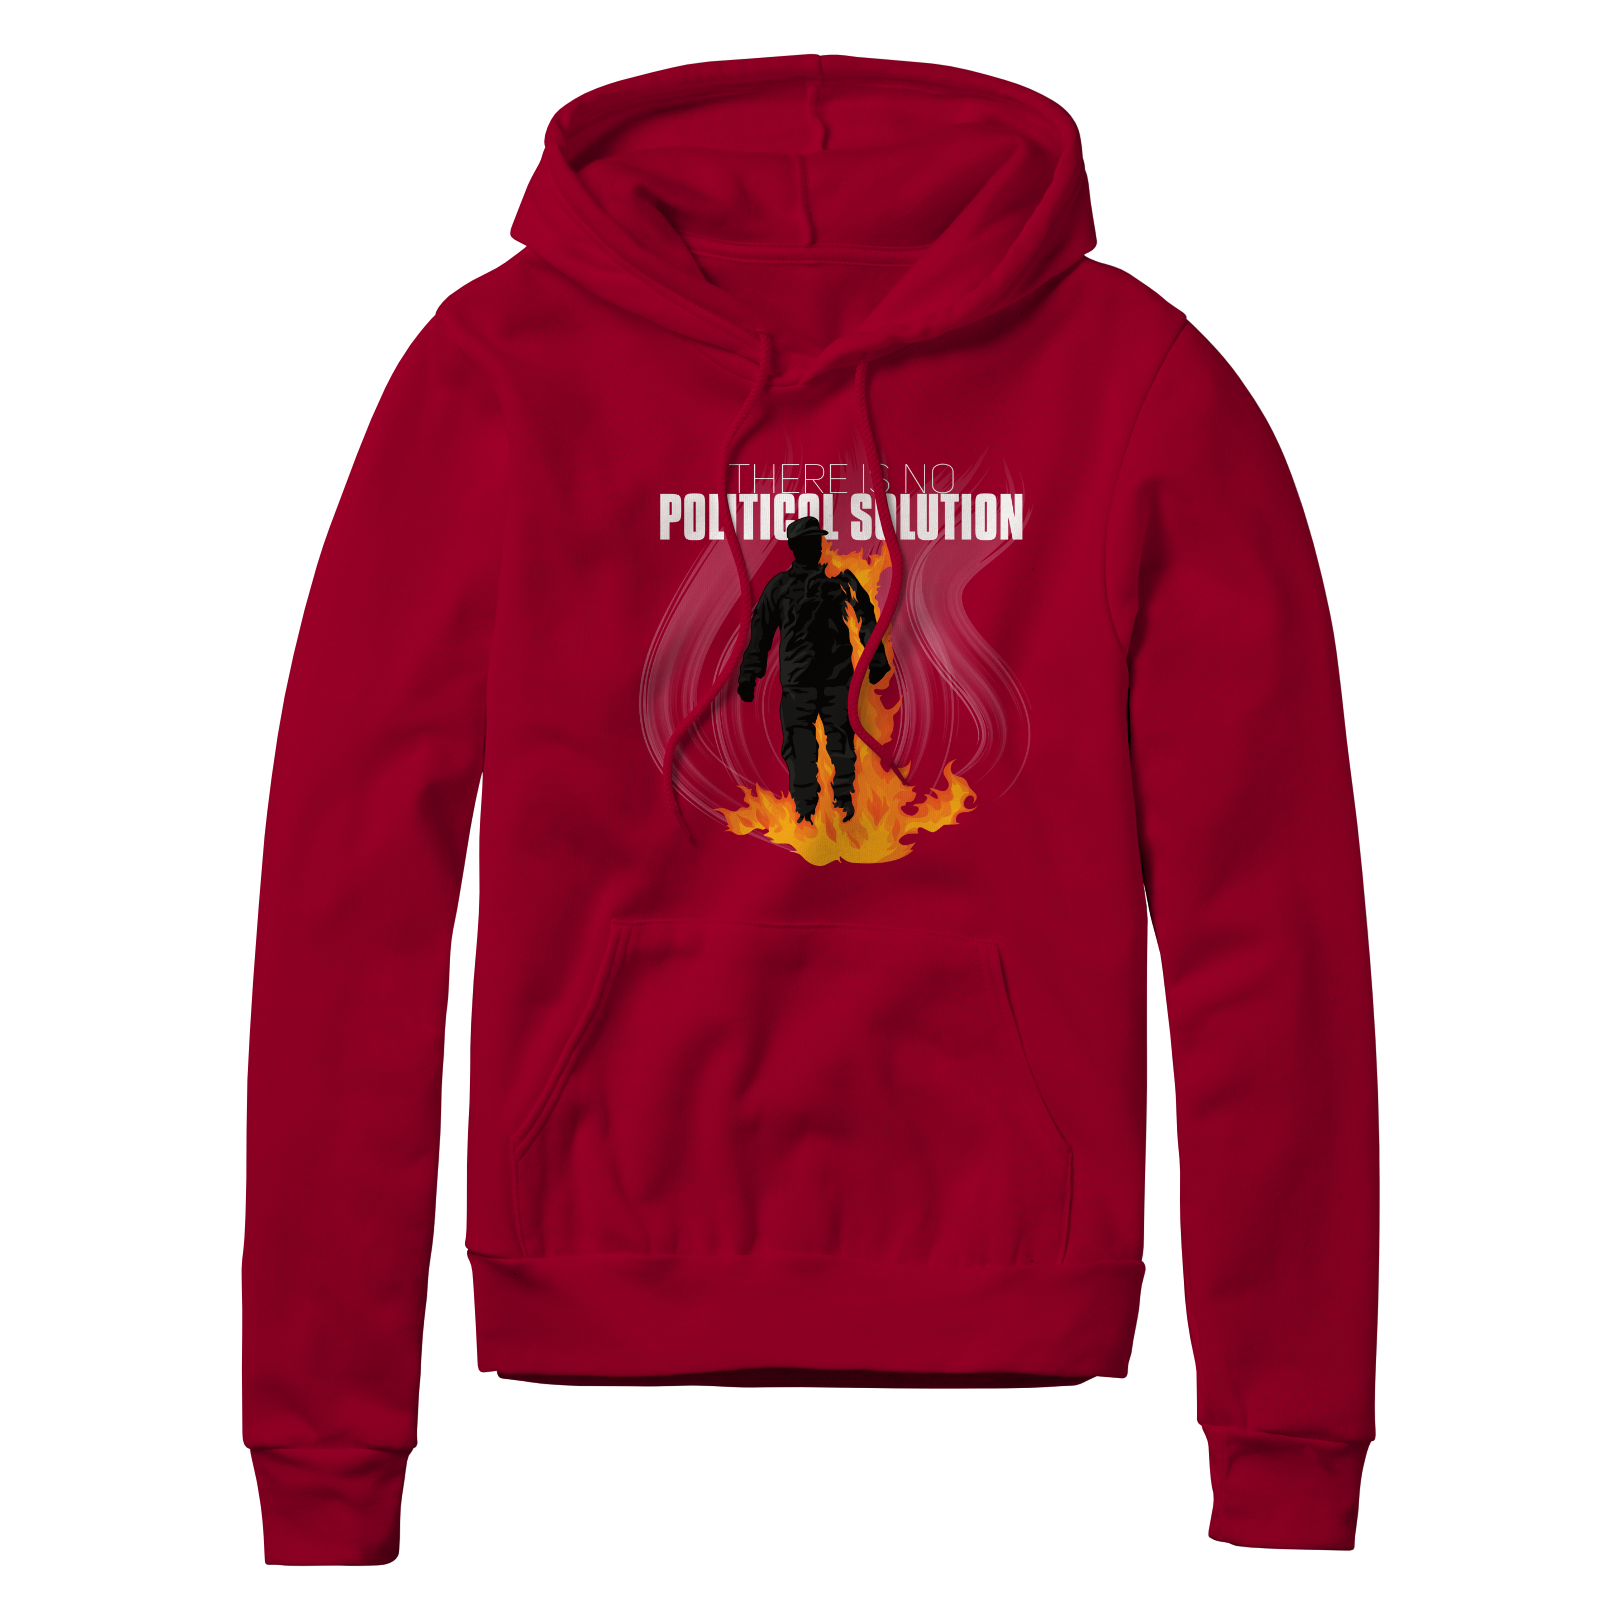 There Is No Political Solution Hoodie